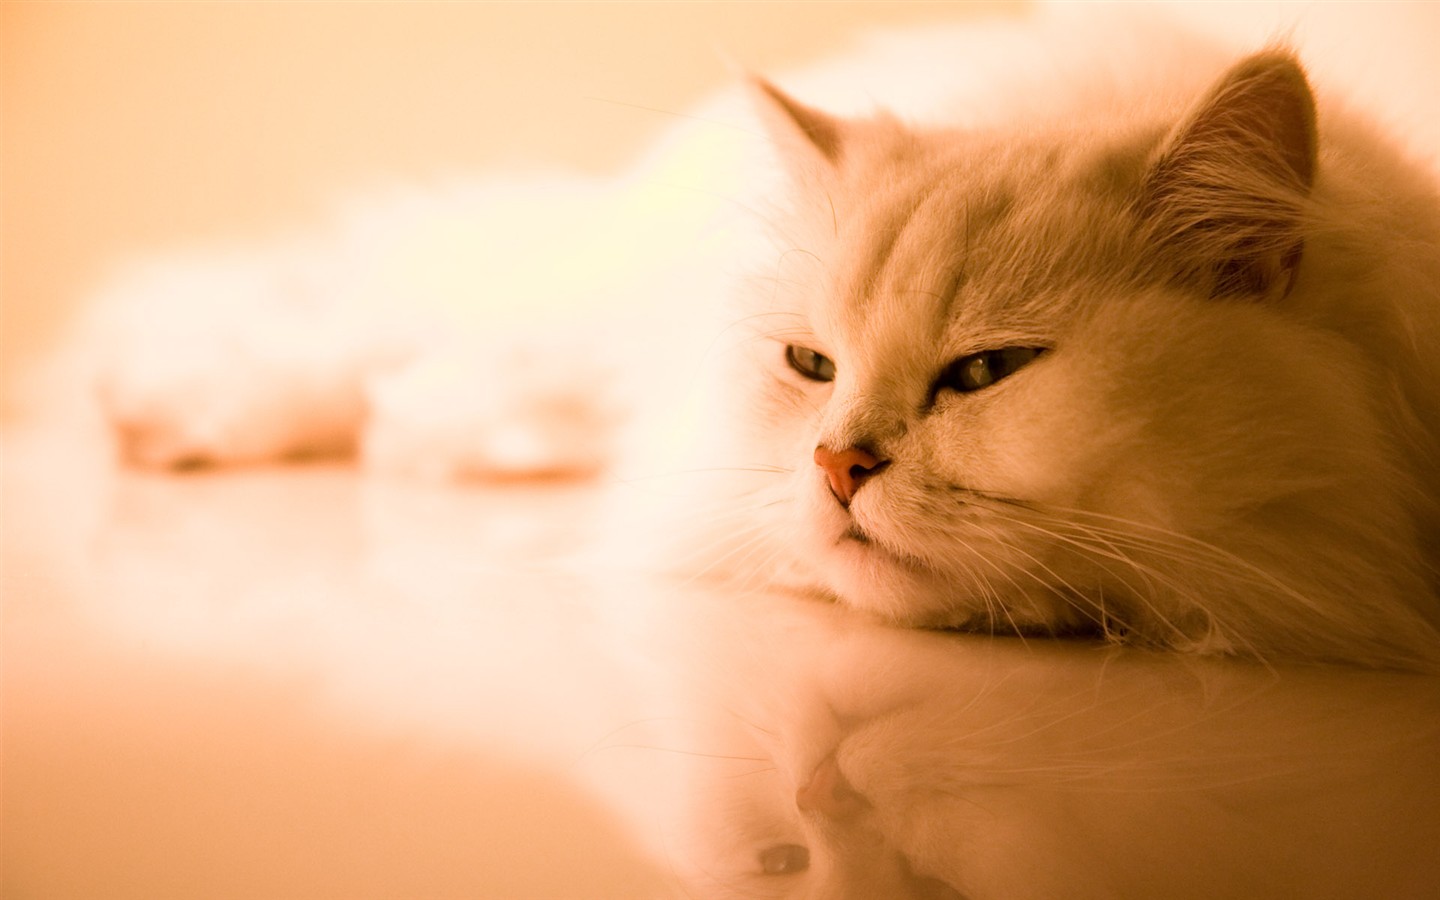 Cat photo HD Wallpapers #35 - 1440x900